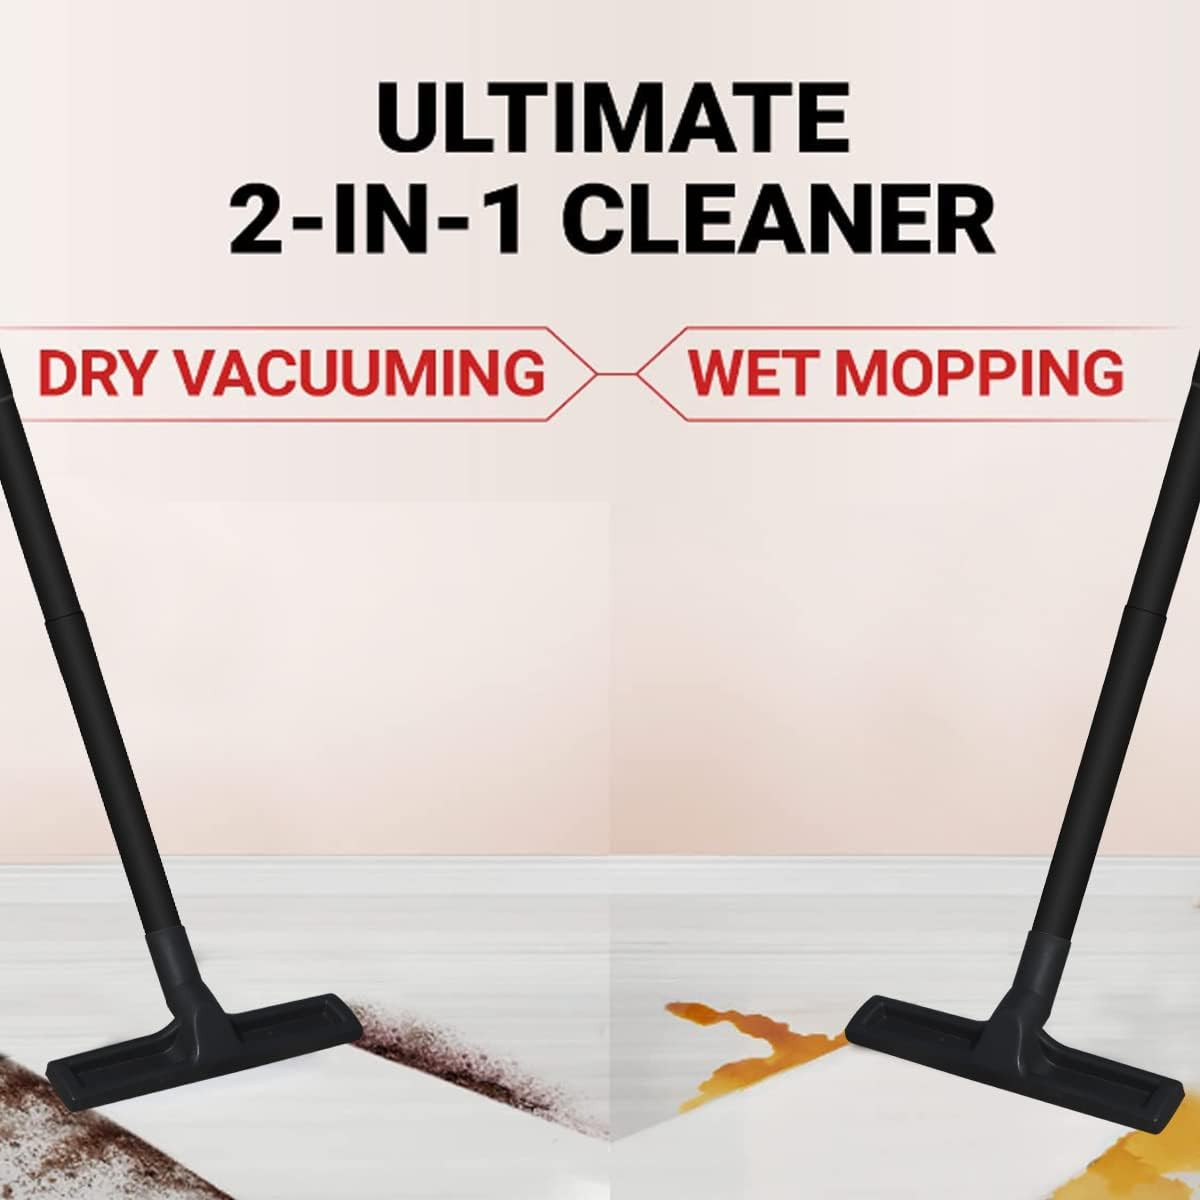 INALSA Vacuum Cleaner Wet and Dry Heavy Duty 1700 W  25 Ltr Capacity22KPA SuctionHEPA Filter  Metal Telescopic Tube2 Year WarrantySS Metal TankFor HomeOfficeHotel Cleaning Master Vac 25